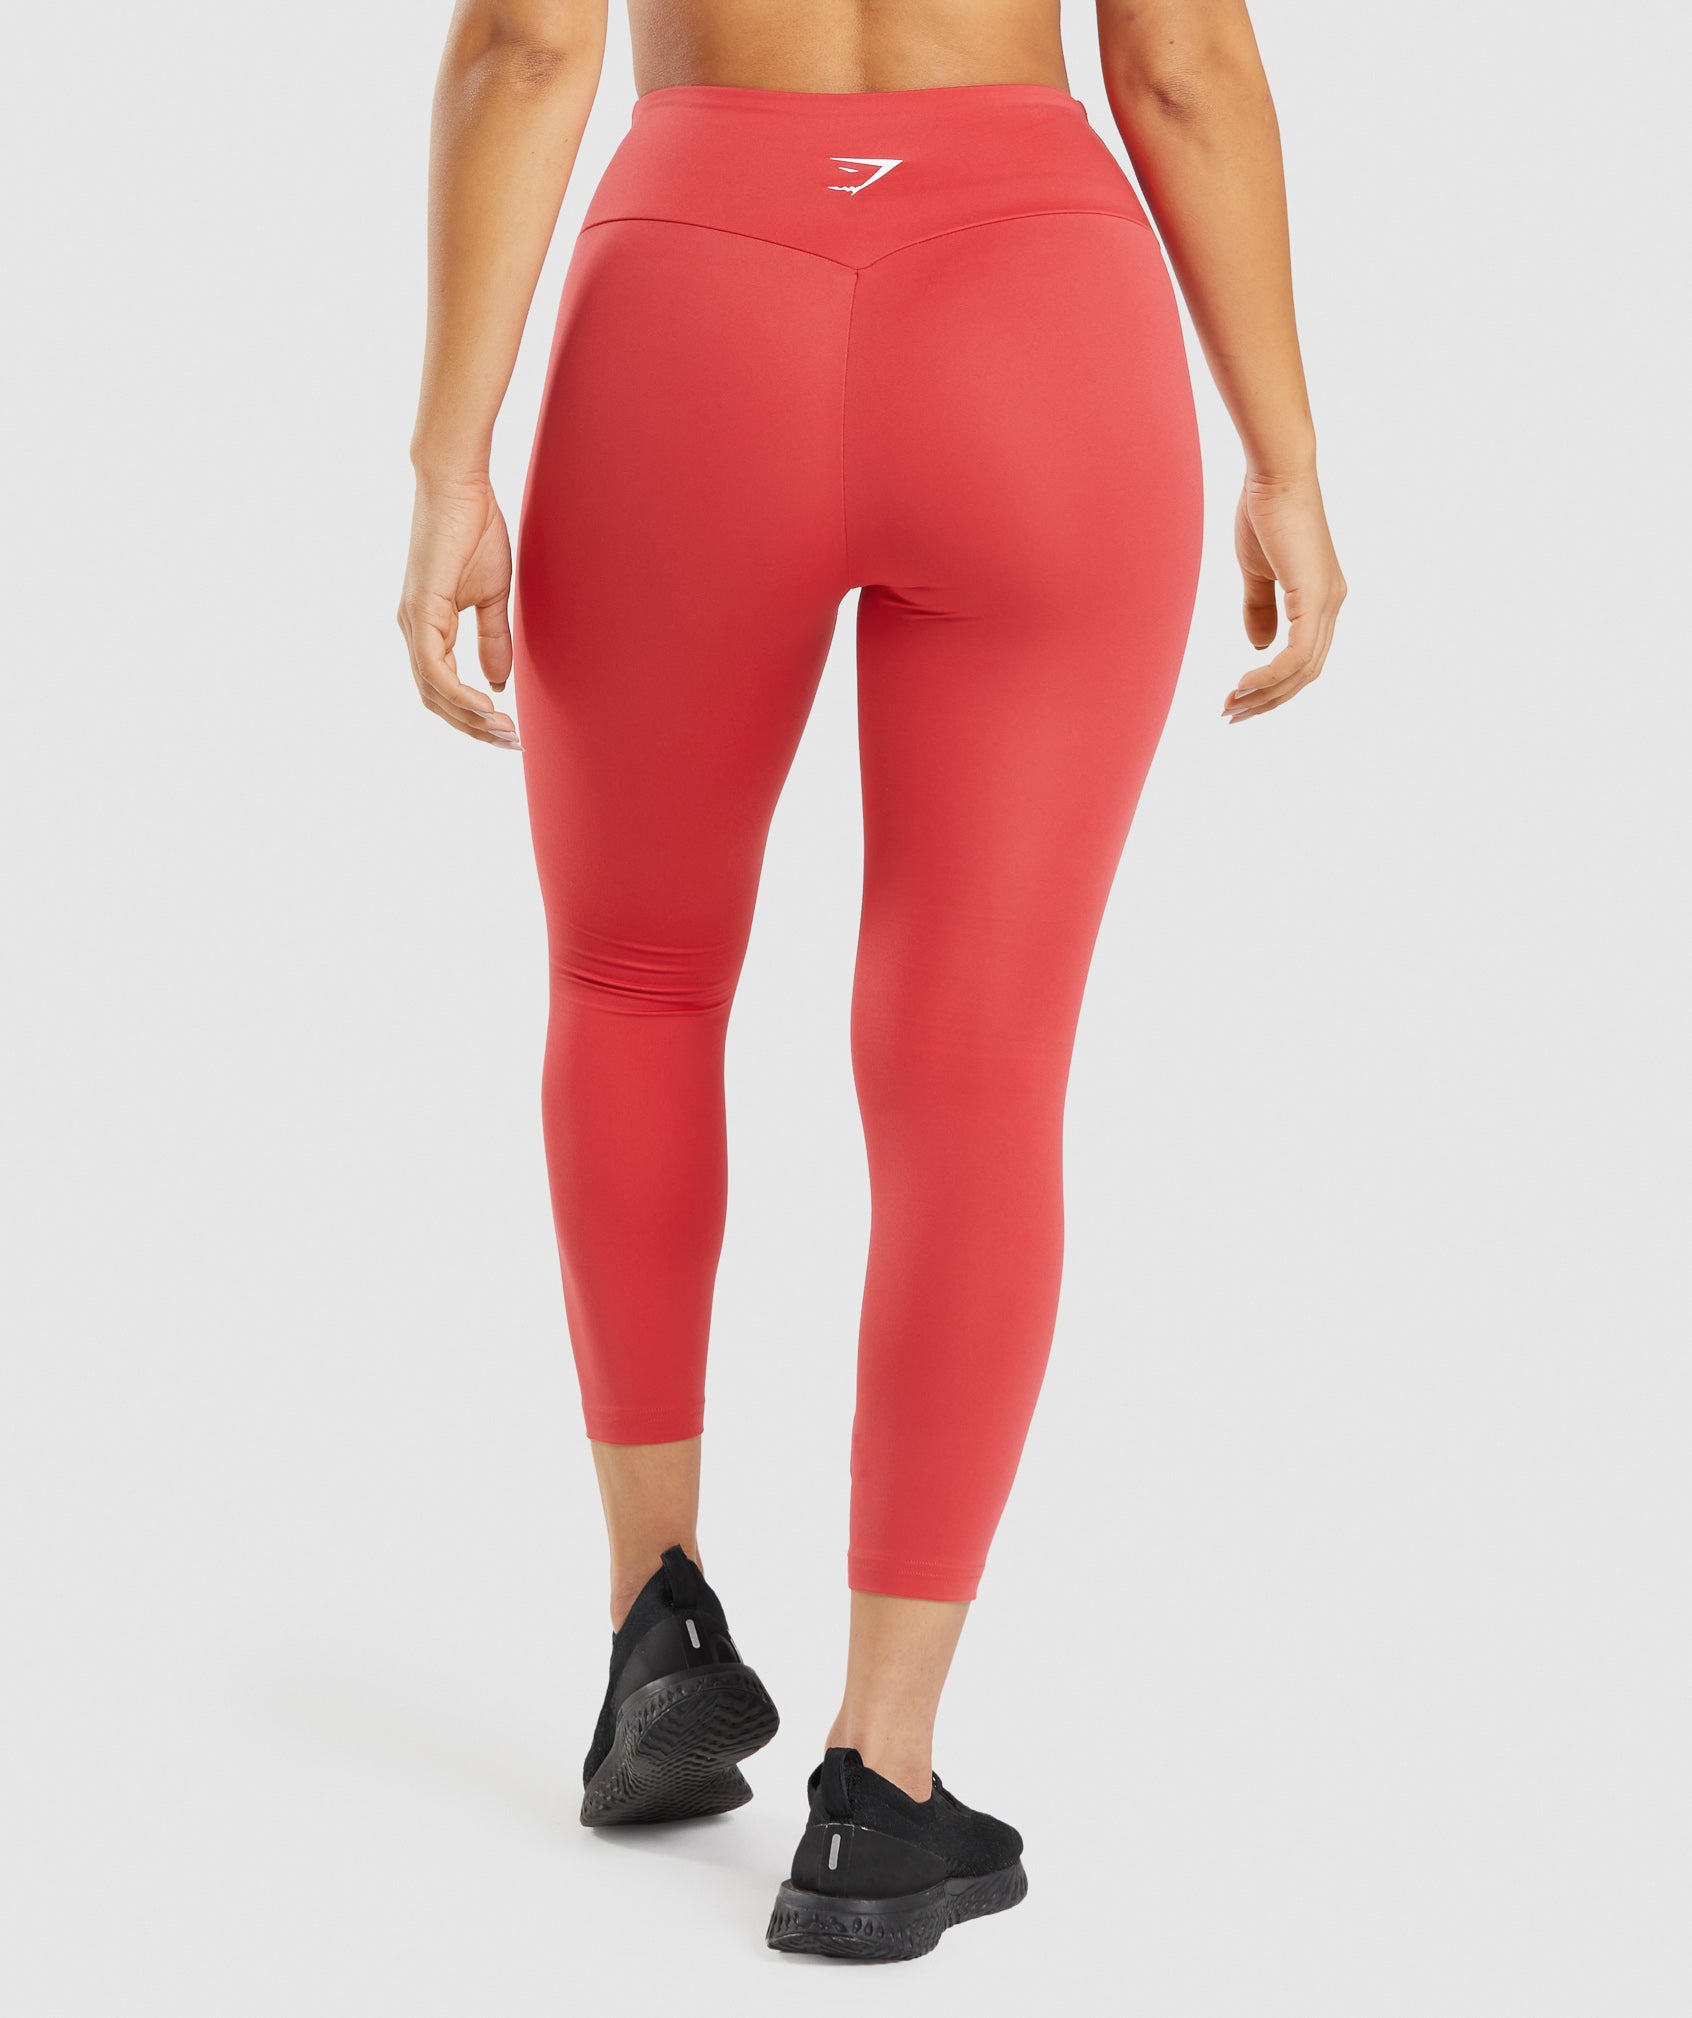 Training 7/8 Leggings in Ruby Red - view 2